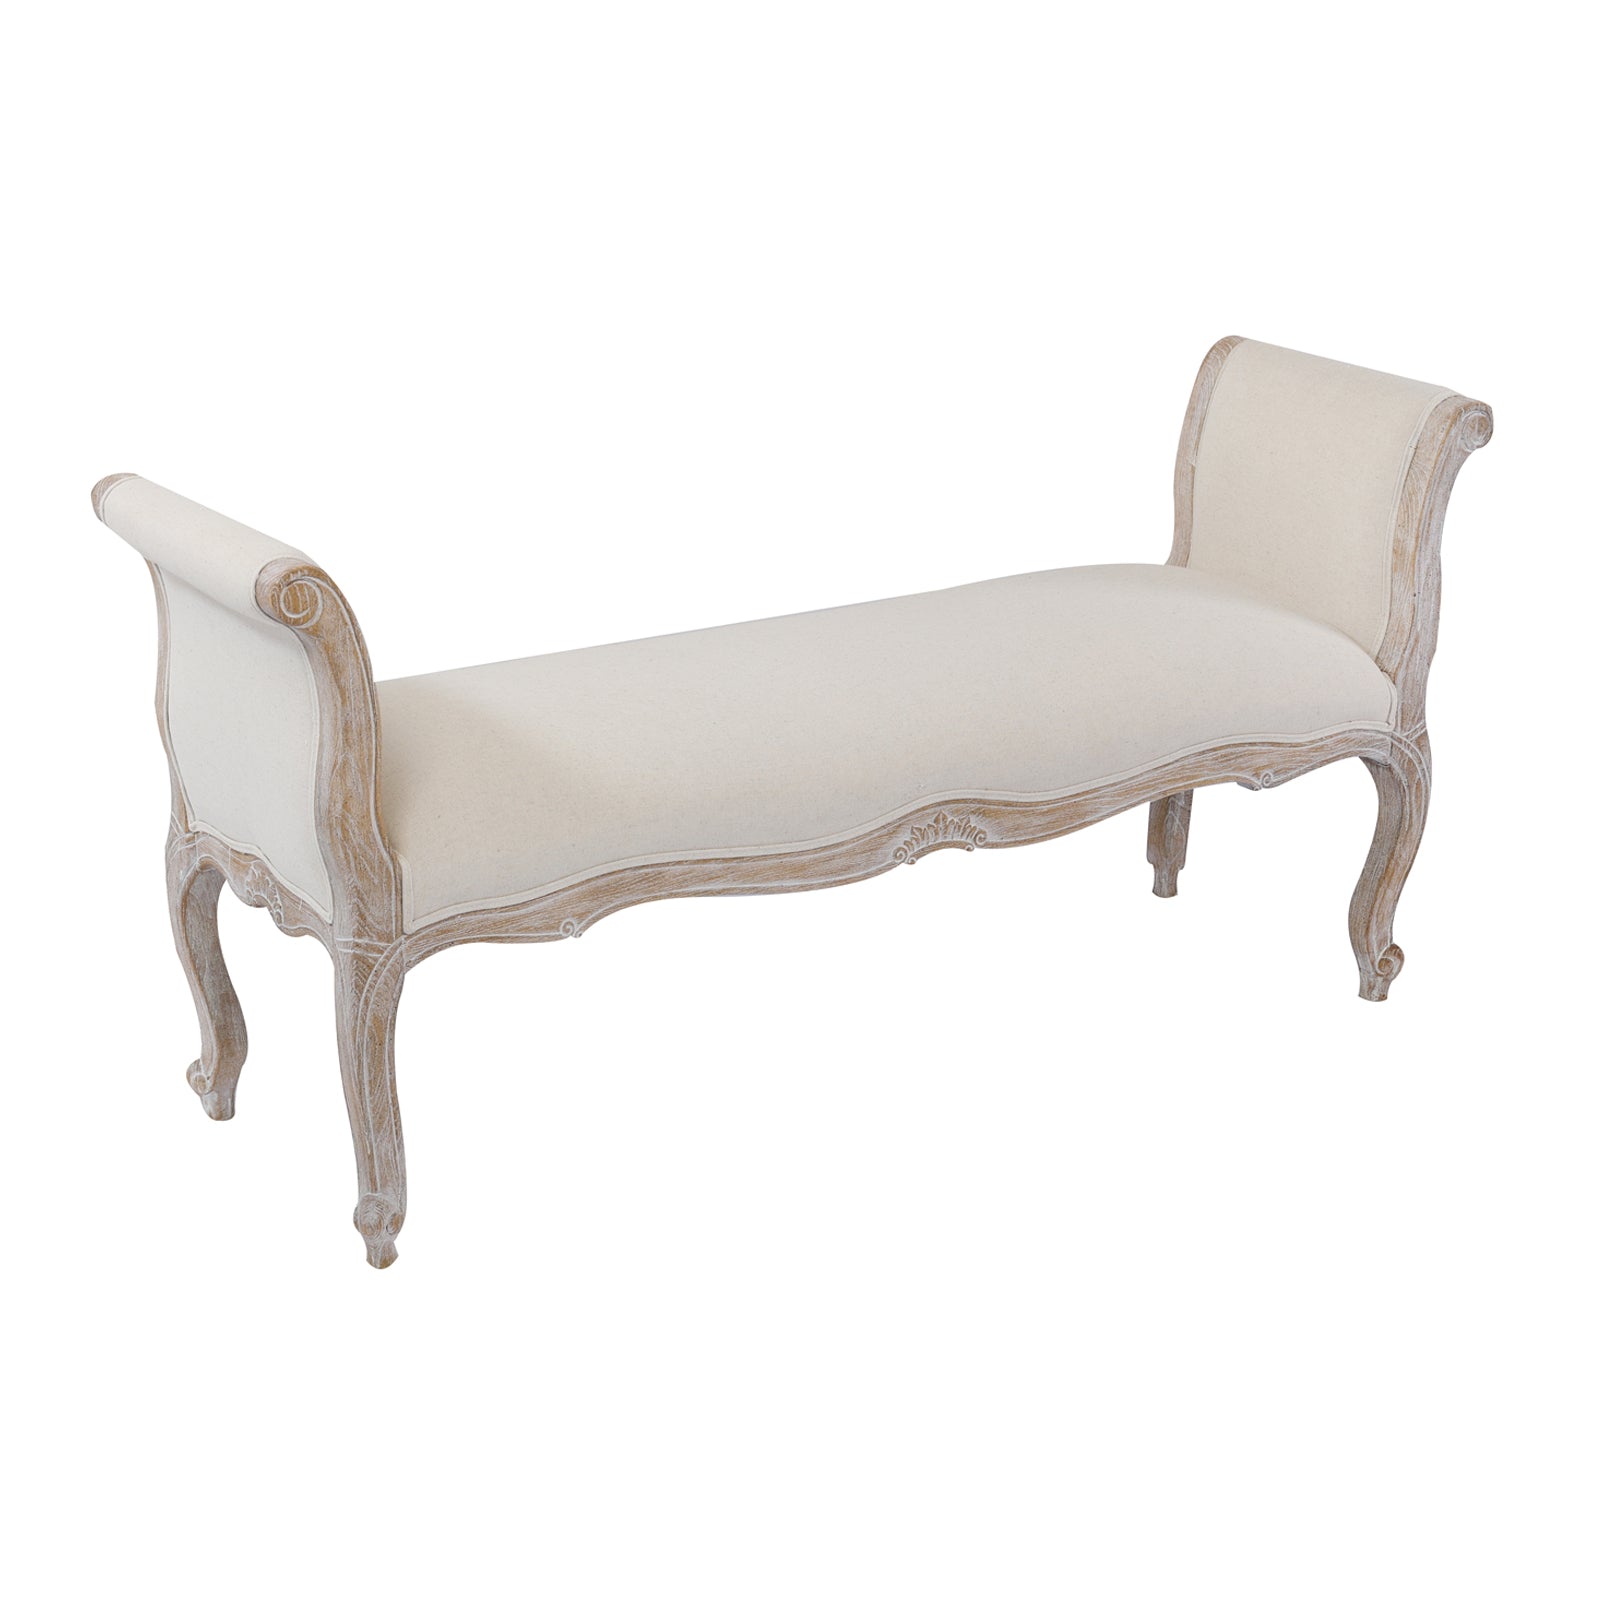 Lori Bench Chair Beige White Washed Wooden & Beige Color Fabric